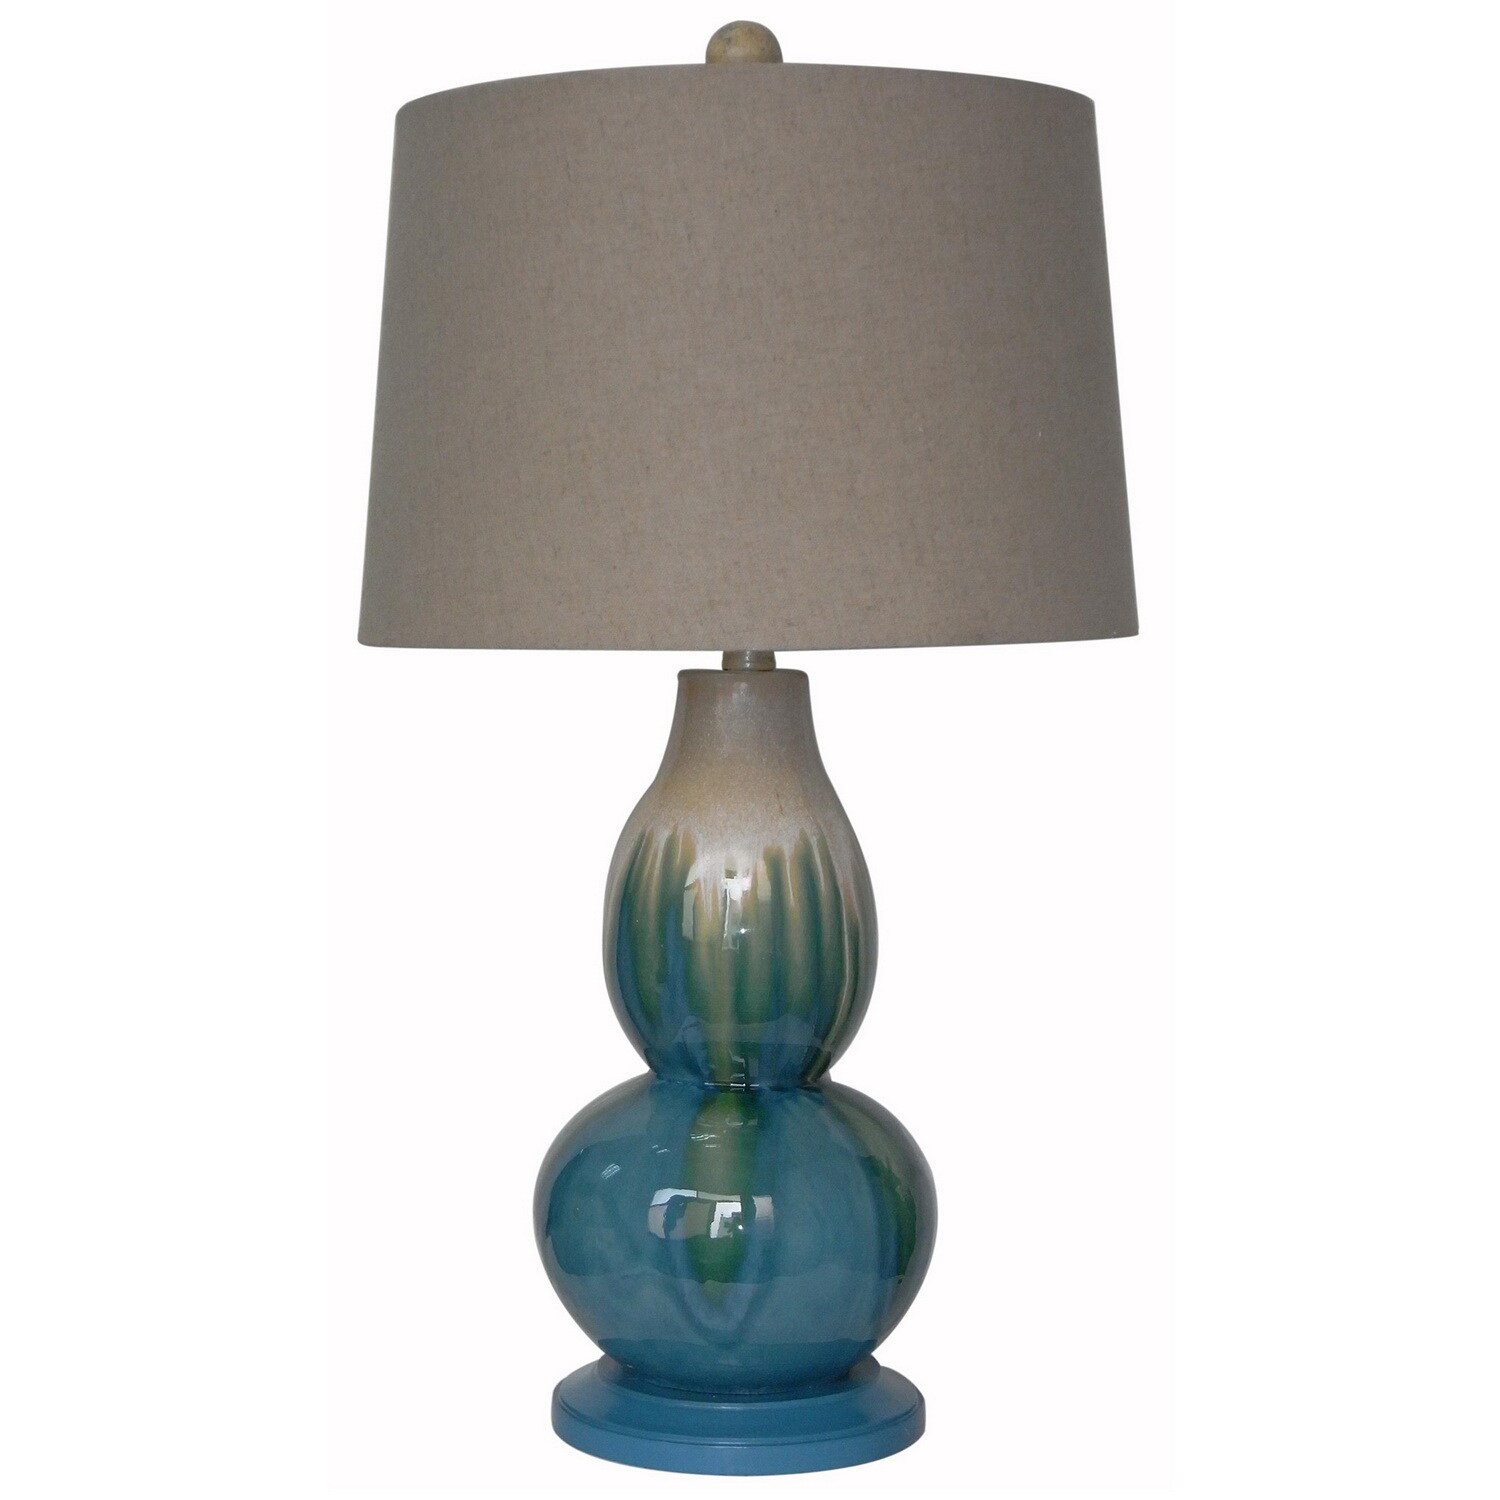 Integrity 28 inch Cream And Blue Crackle Double Gourd Ceramic Table Lamp (Cream and blueMaterials CeramicDimensions 28 inches high x 16.5 inches wide x 16.5 inches deep )